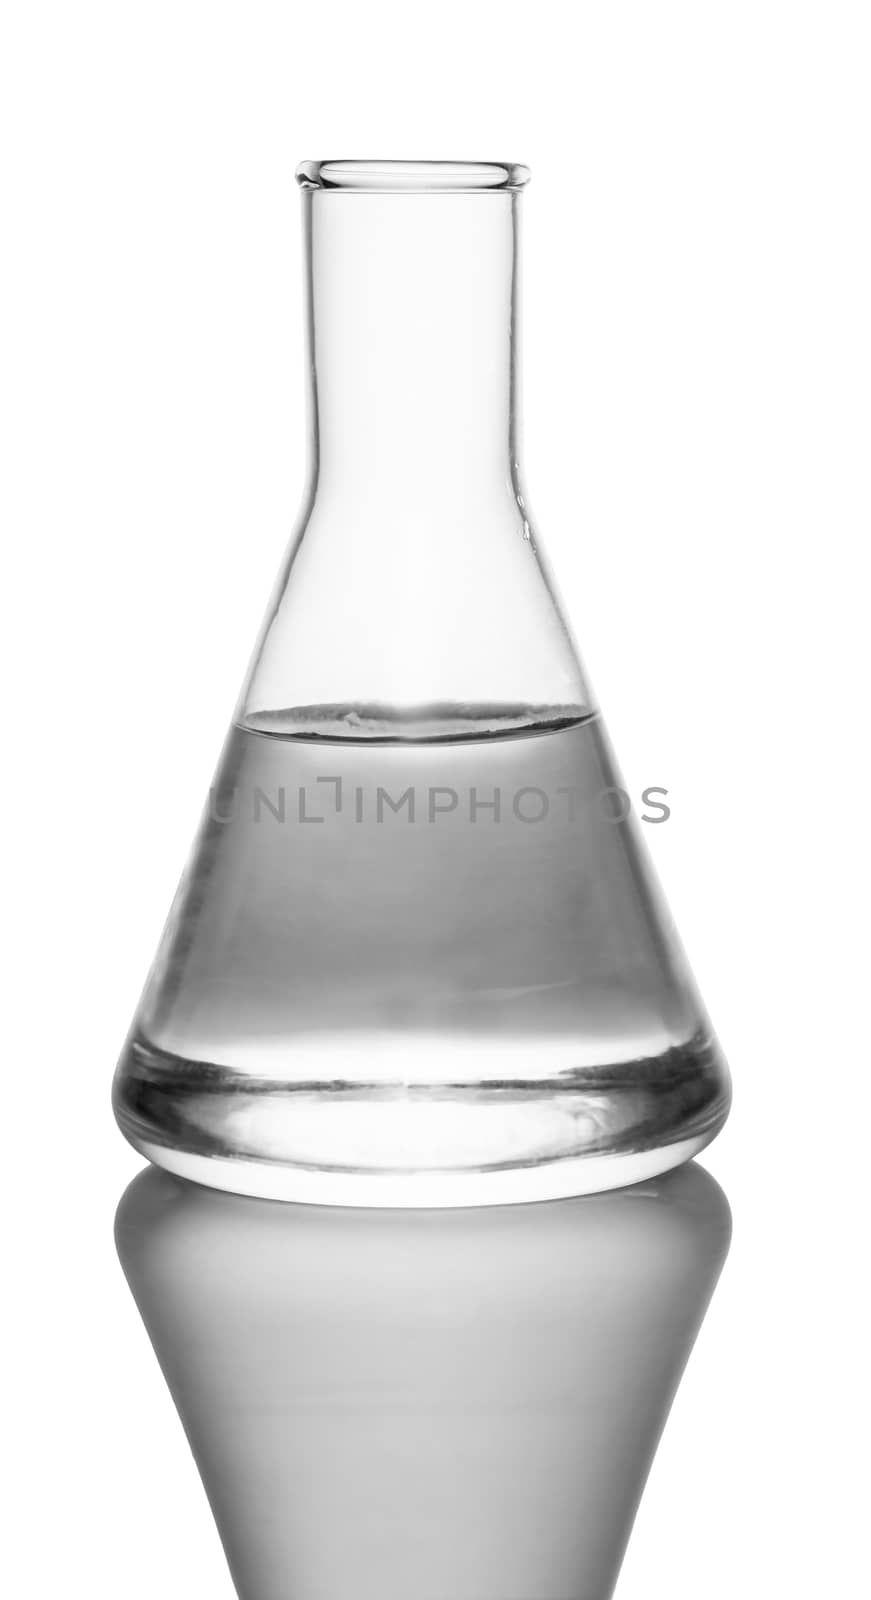 Chemical flask with liquid on a white background